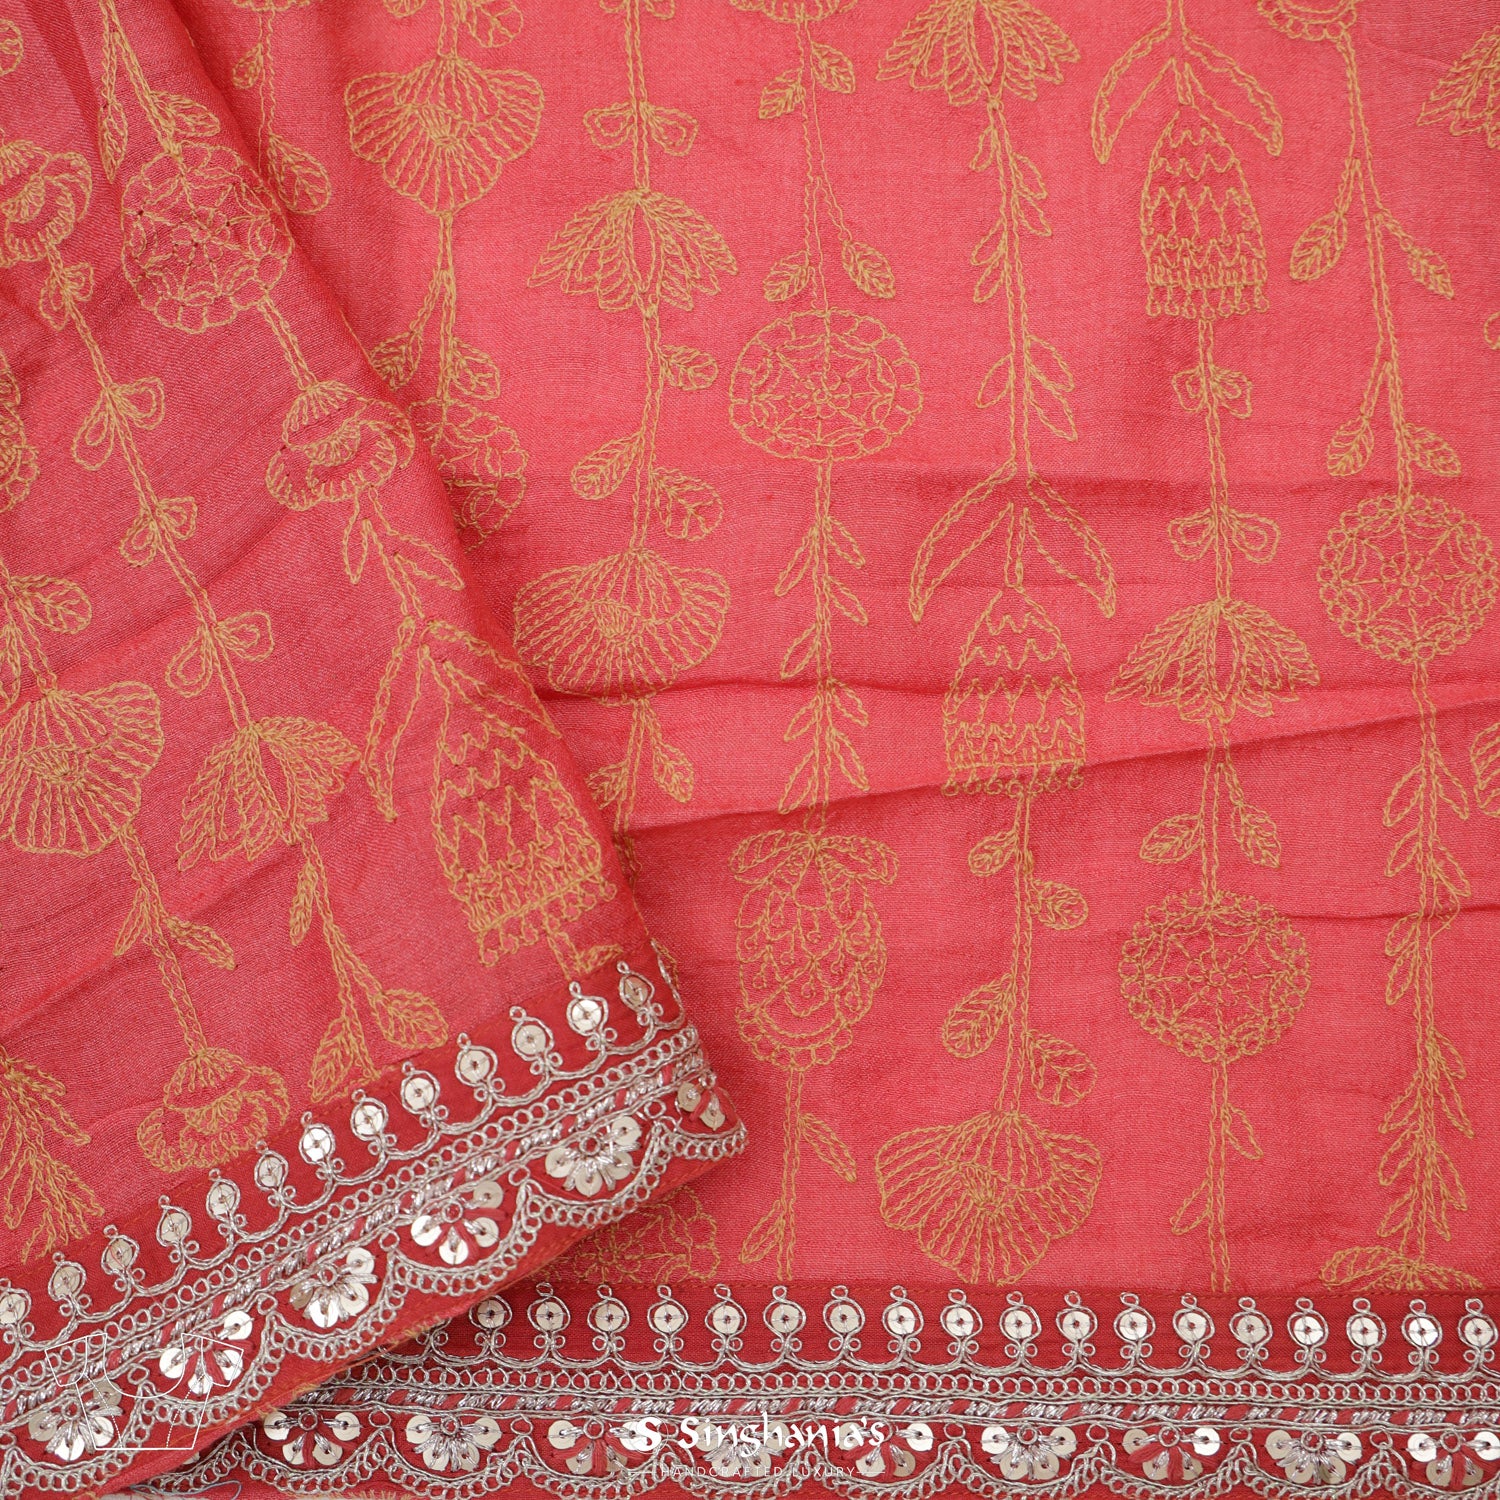 Watermelon Pink Satin Saree With Self Woven Floral Pattern